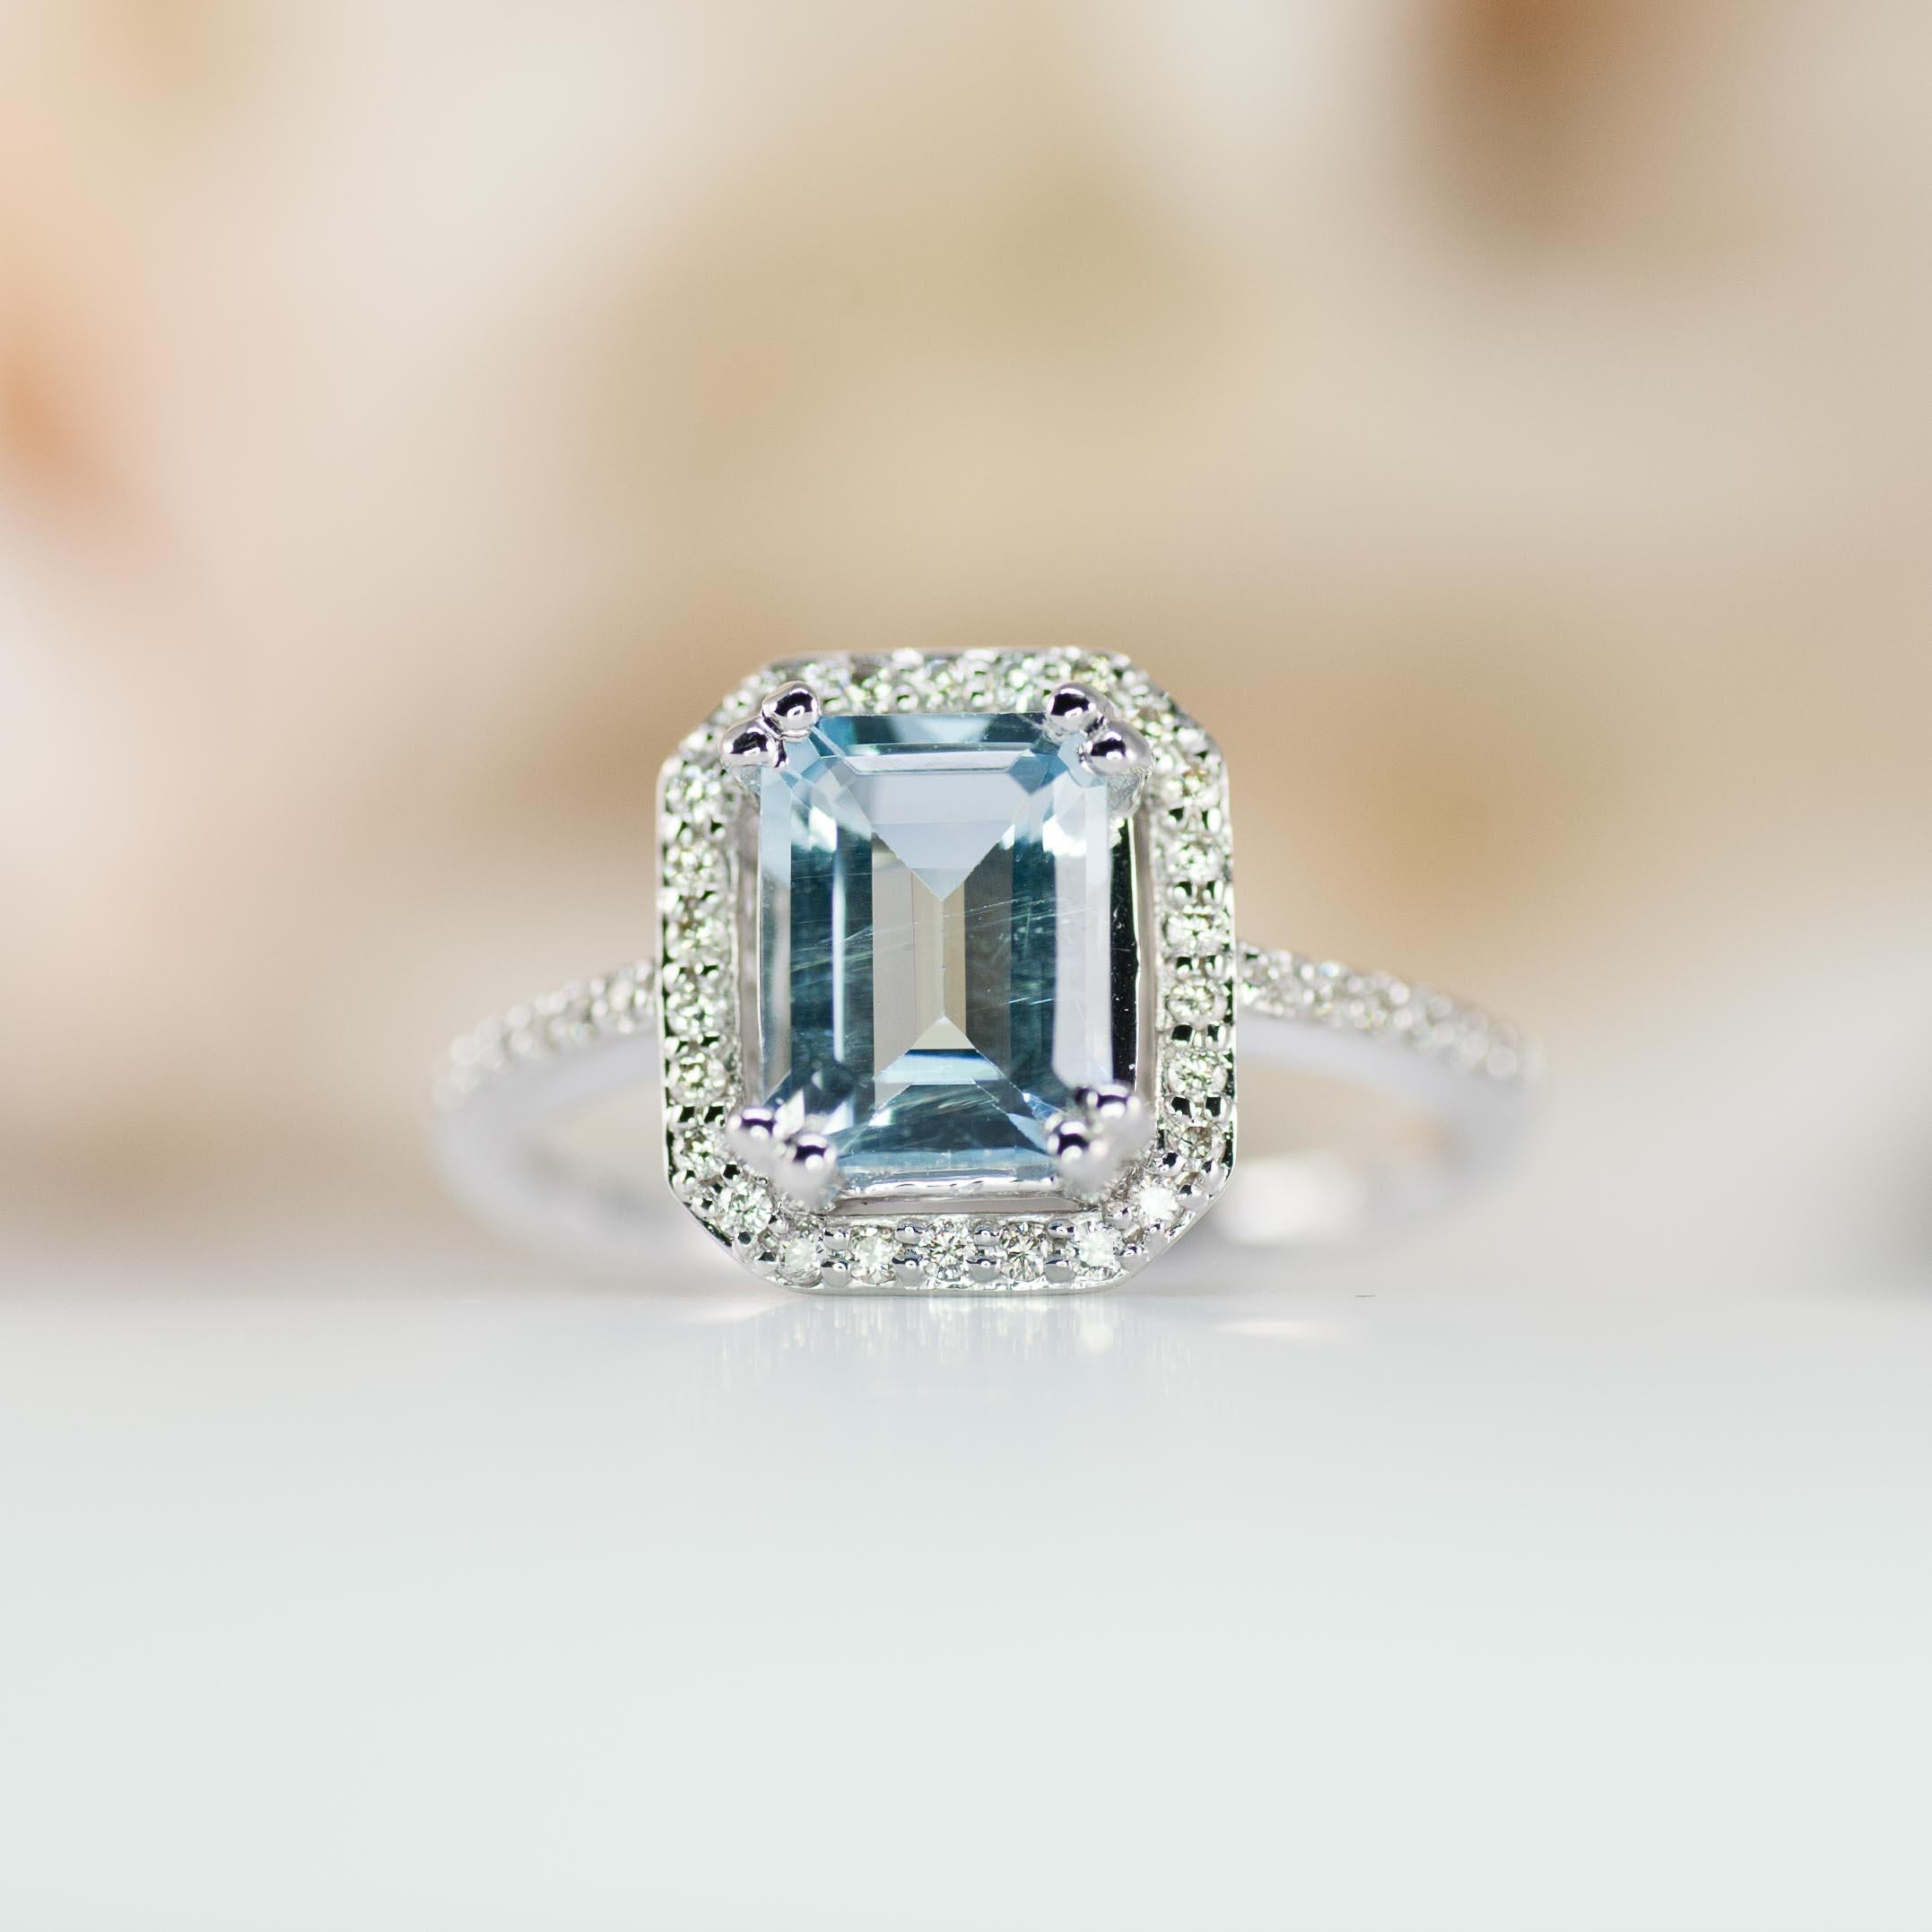 An emerald cut natural aquamarine adds color to this vintage style engagement ring.

The aquamarine is a little over 1.50ct and is a large gemstone with a beautiful light blue color.

You will receive the ring in the pictures.

Standard ring sizes